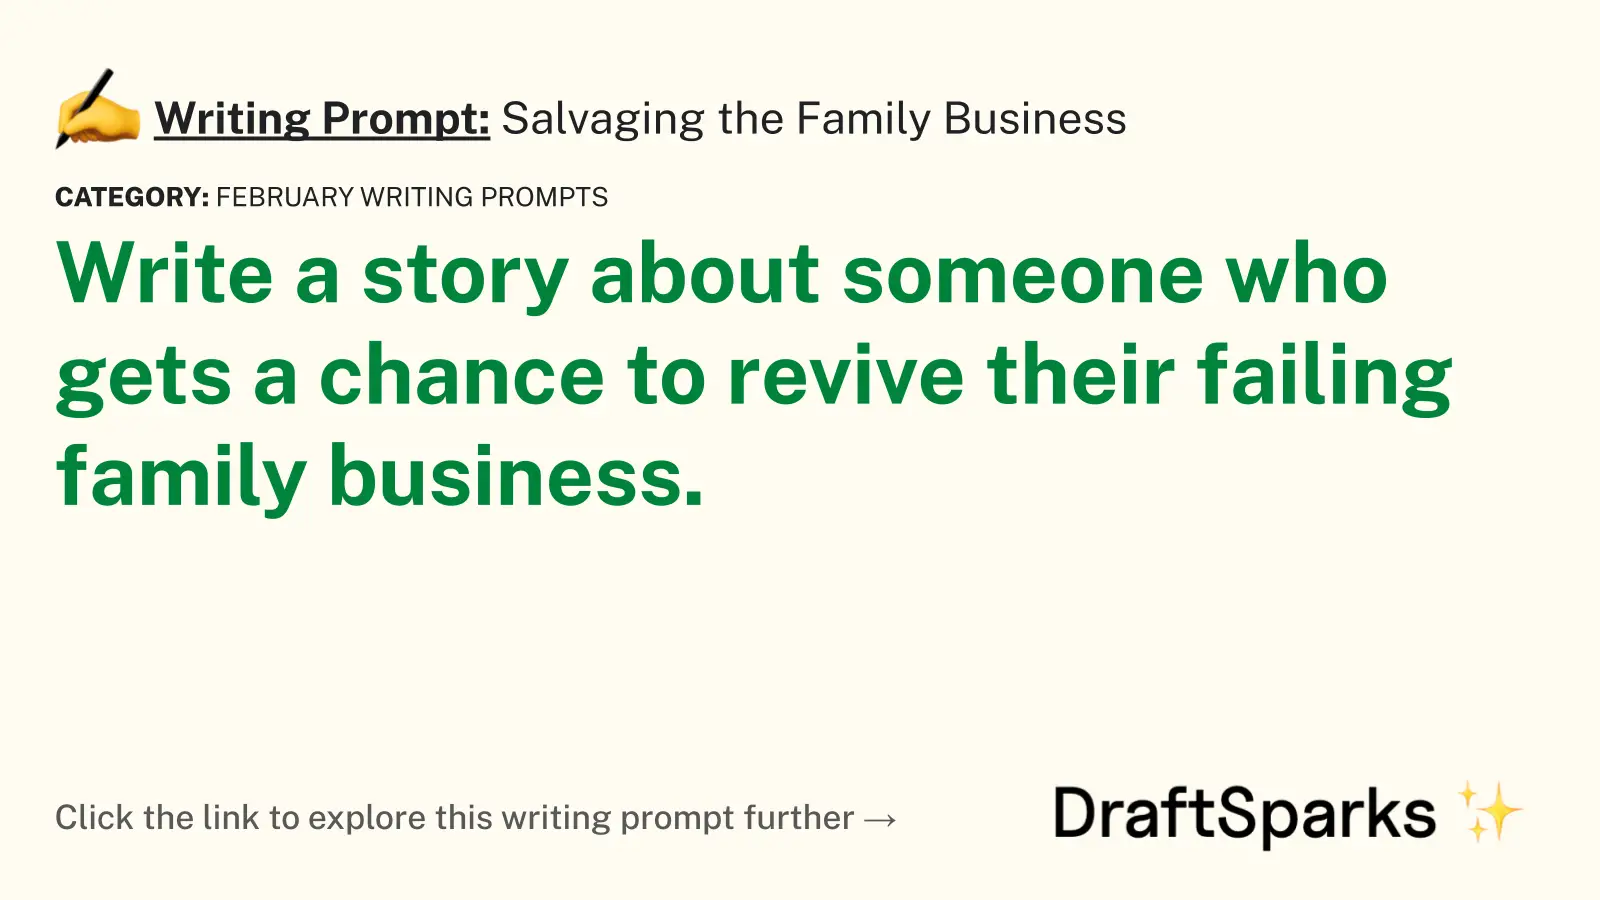 Salvaging the Family Business